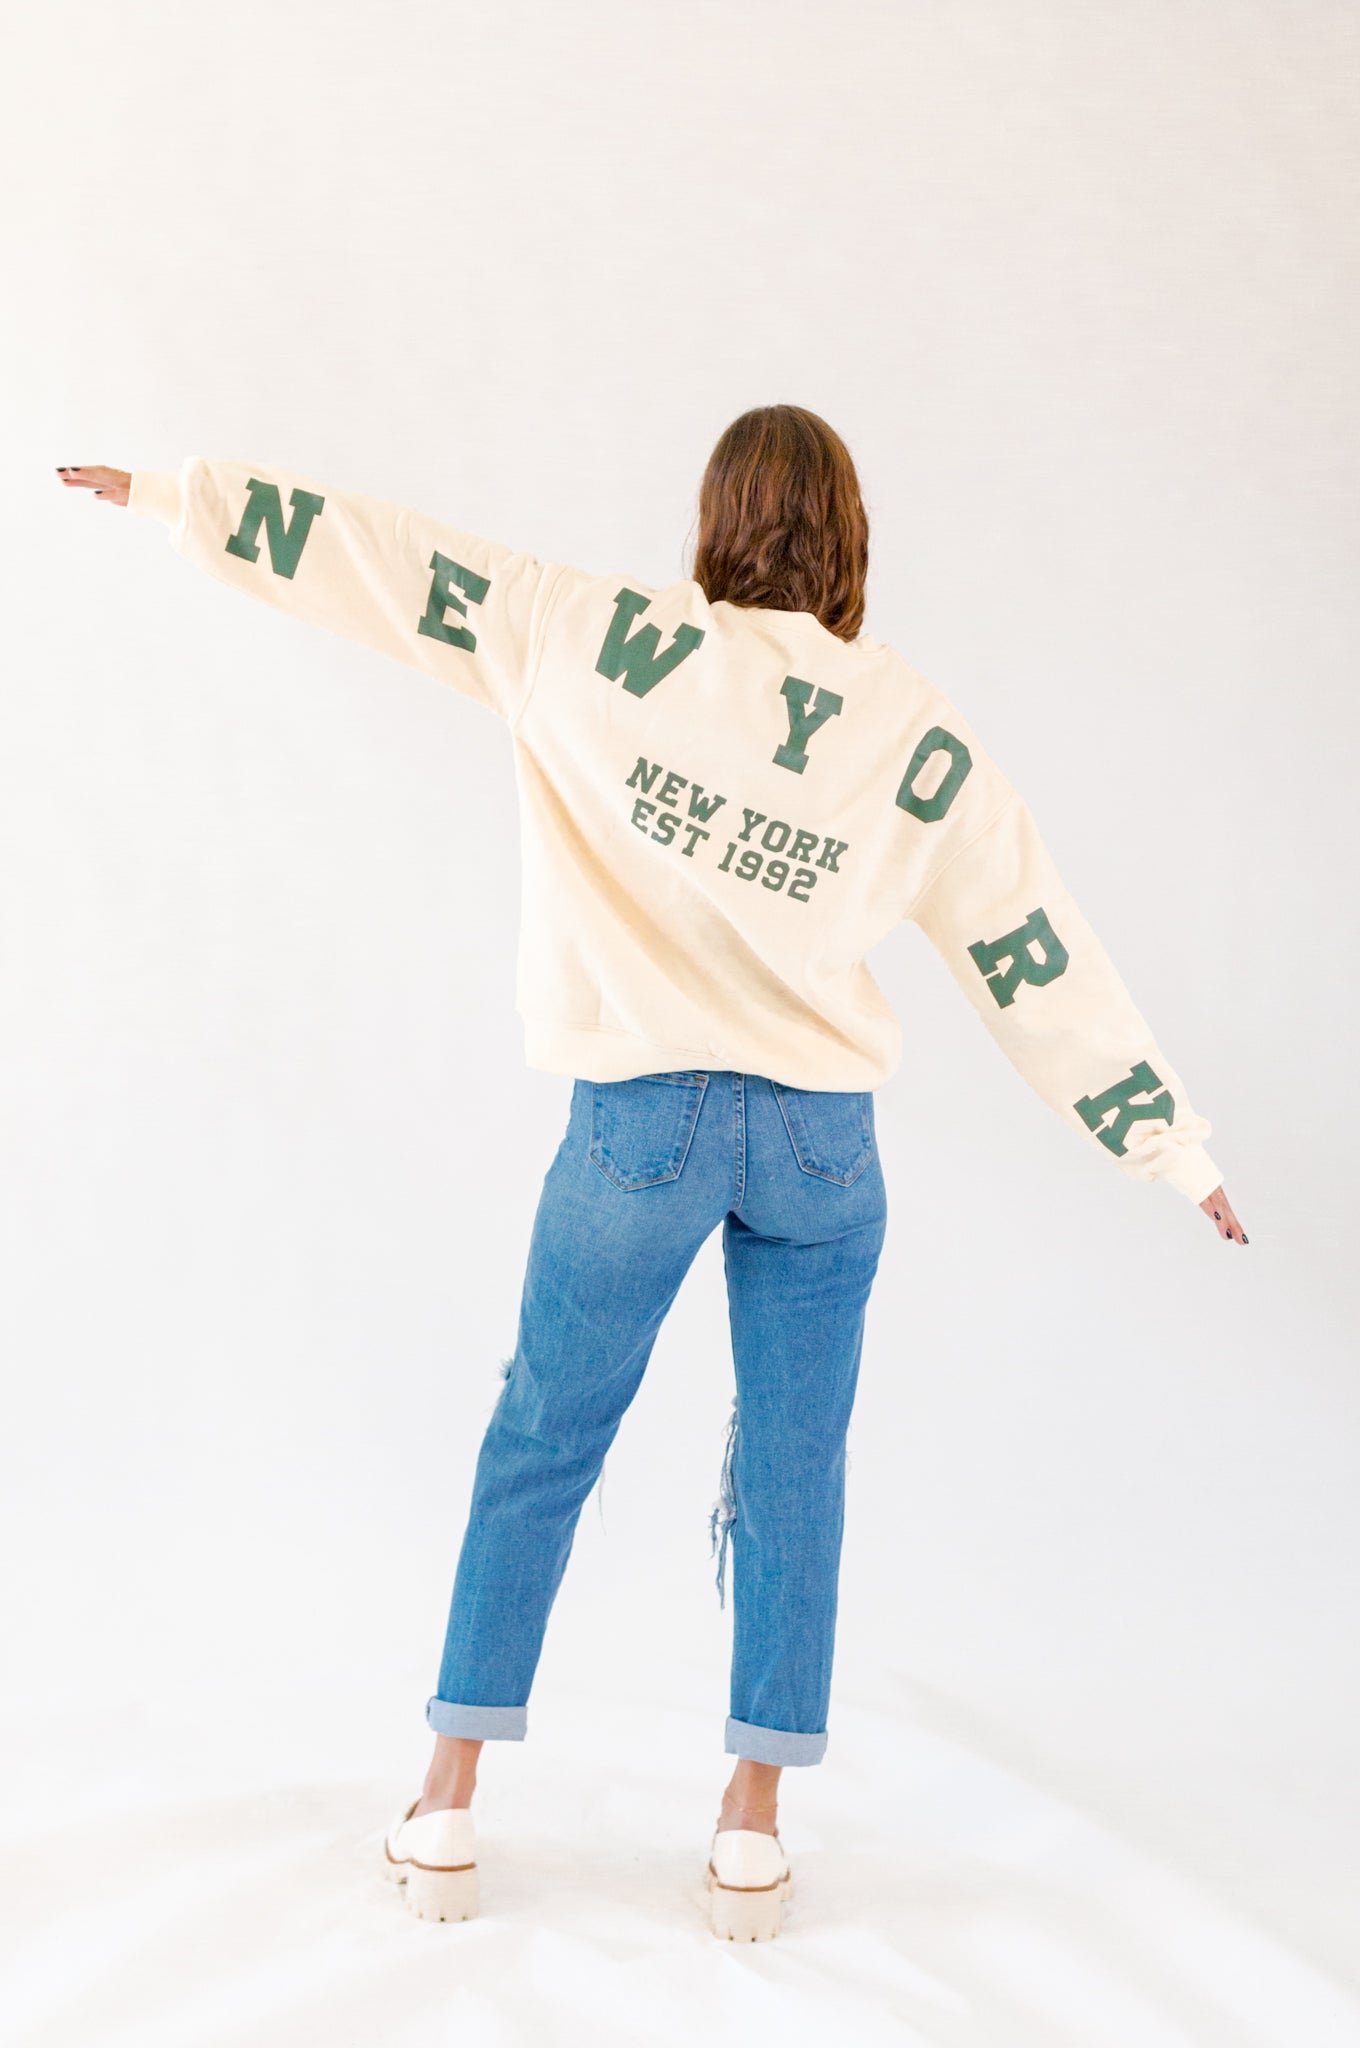 New Yorker Pullover